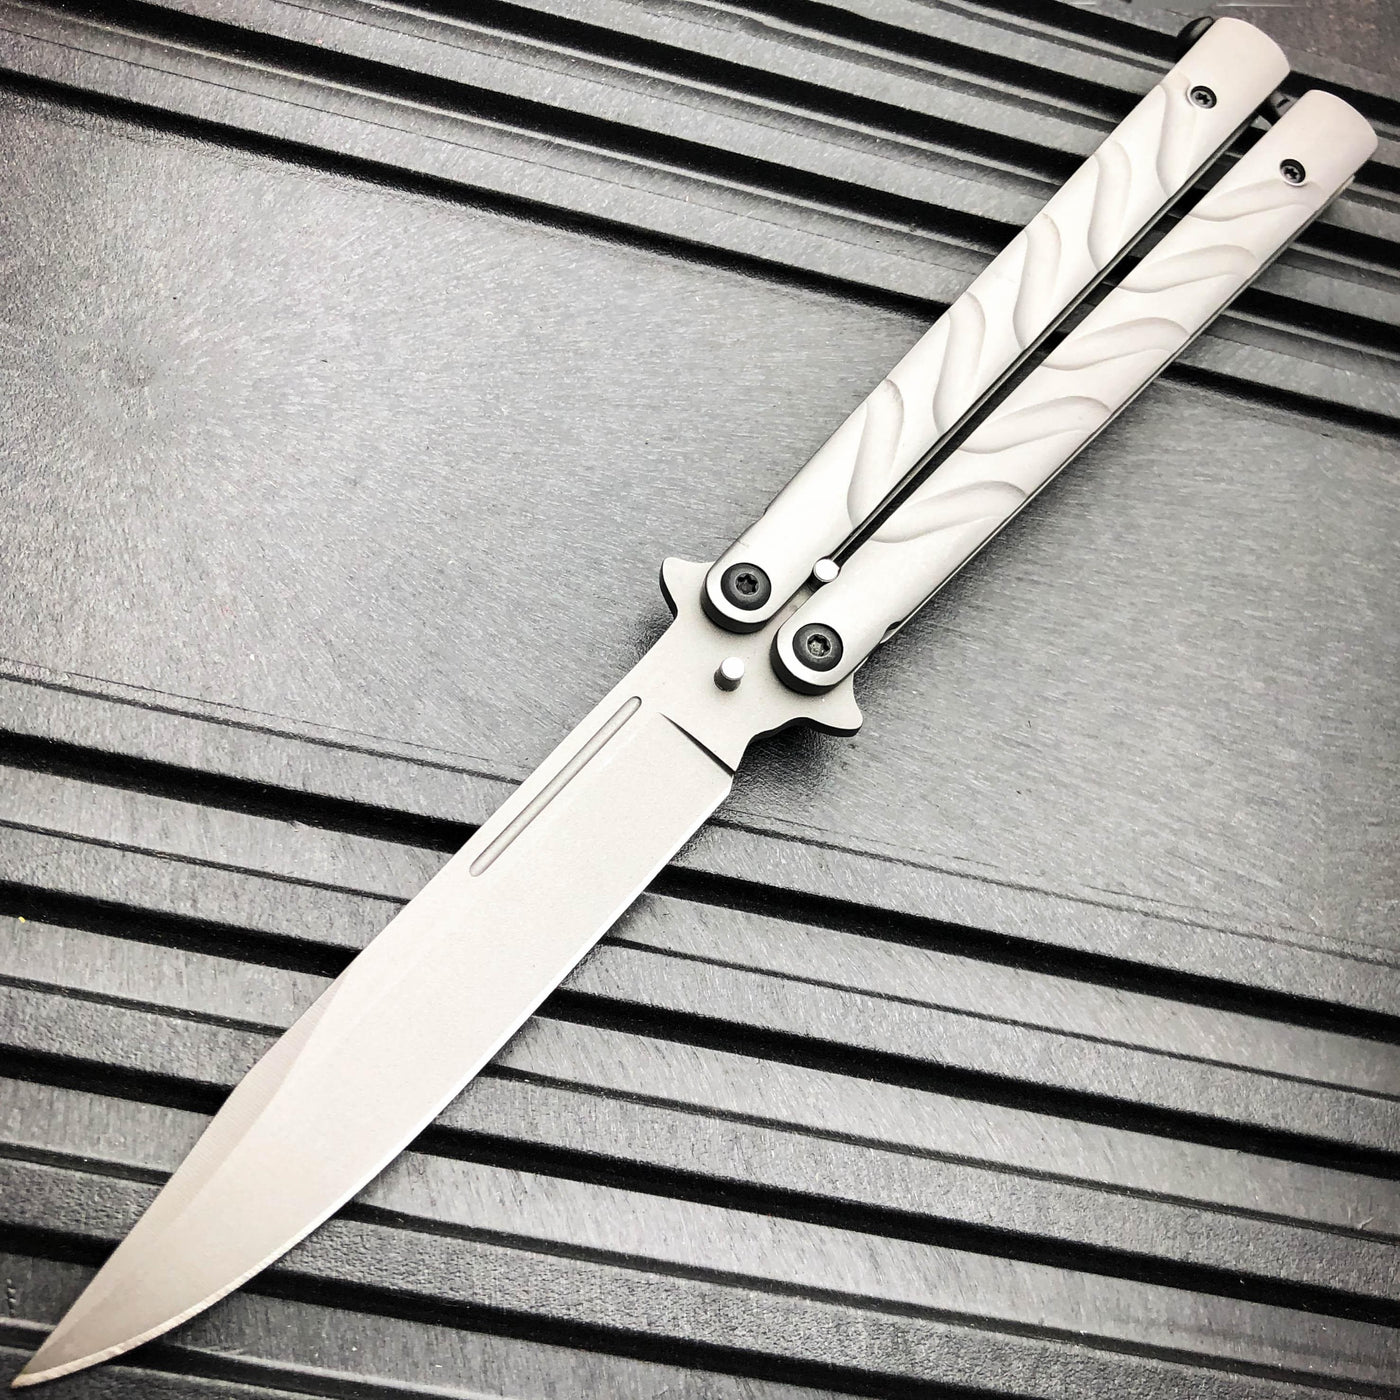 Vortex Balisong Butterfly Knife